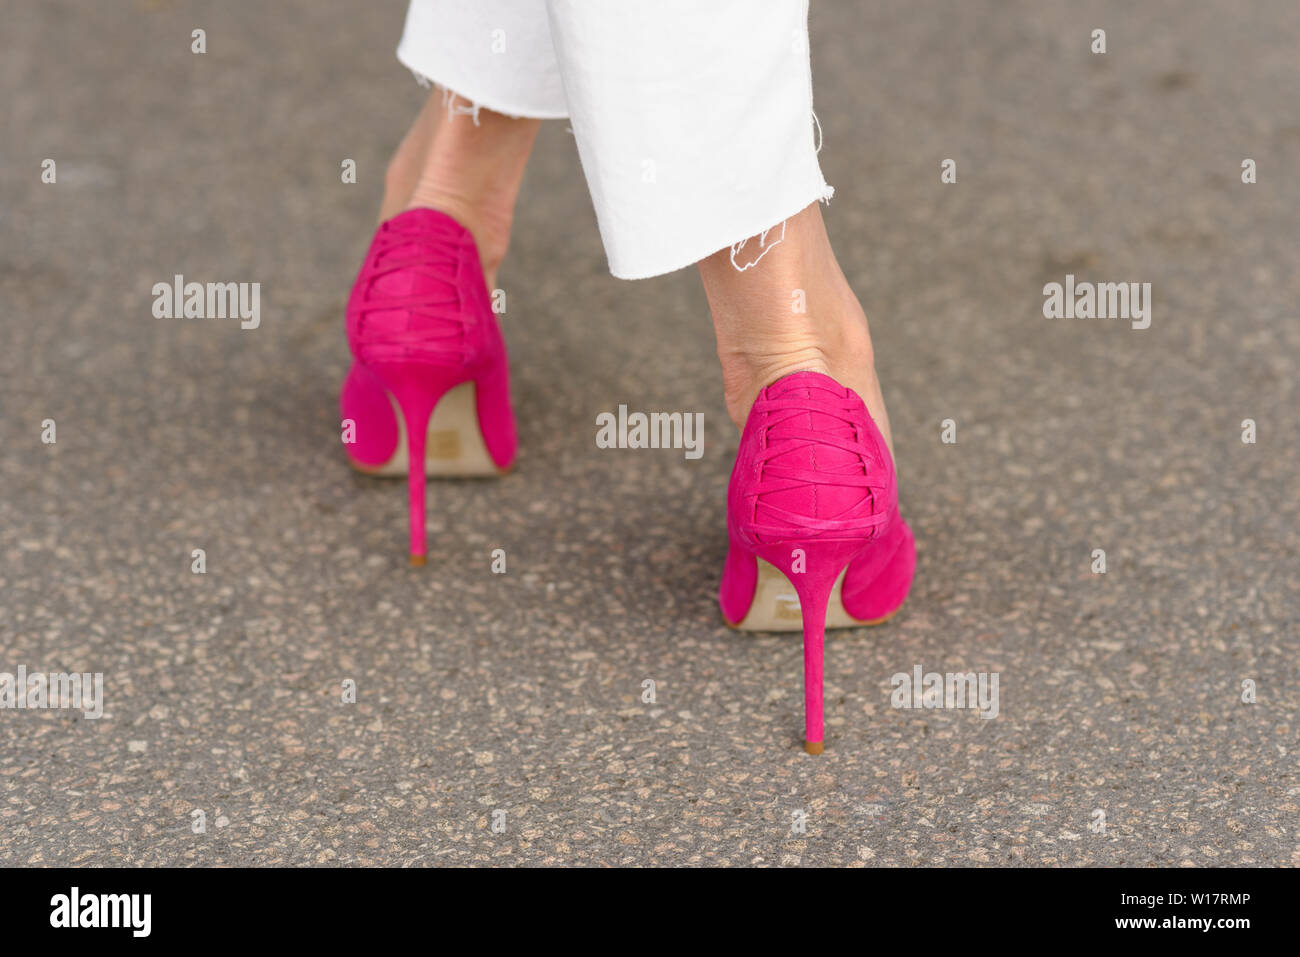 very pink shoes